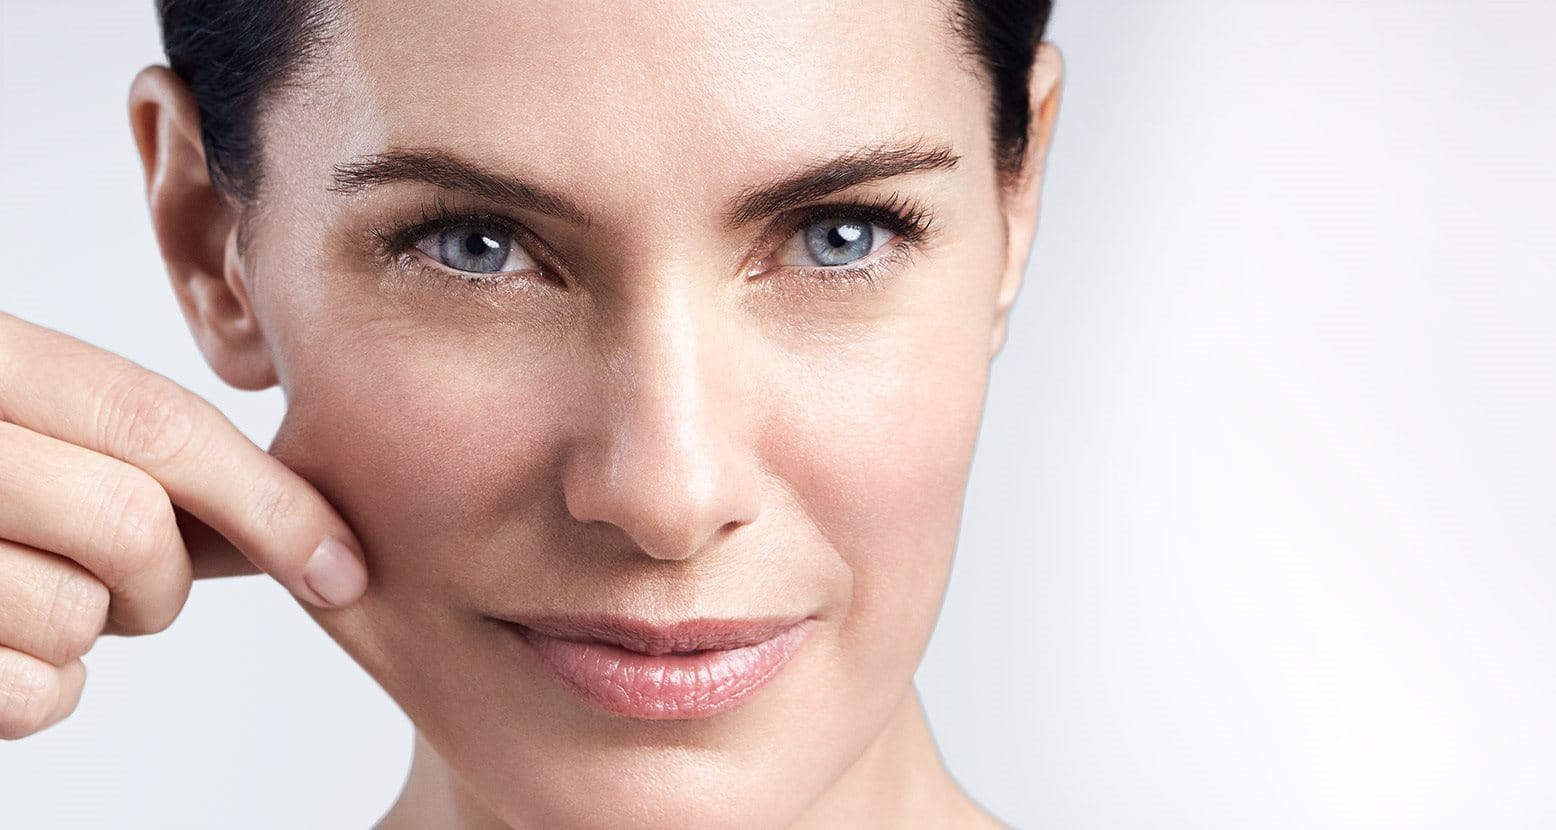 Rejuvenate Your Skin With These Time Tested Methods: Read full article by click